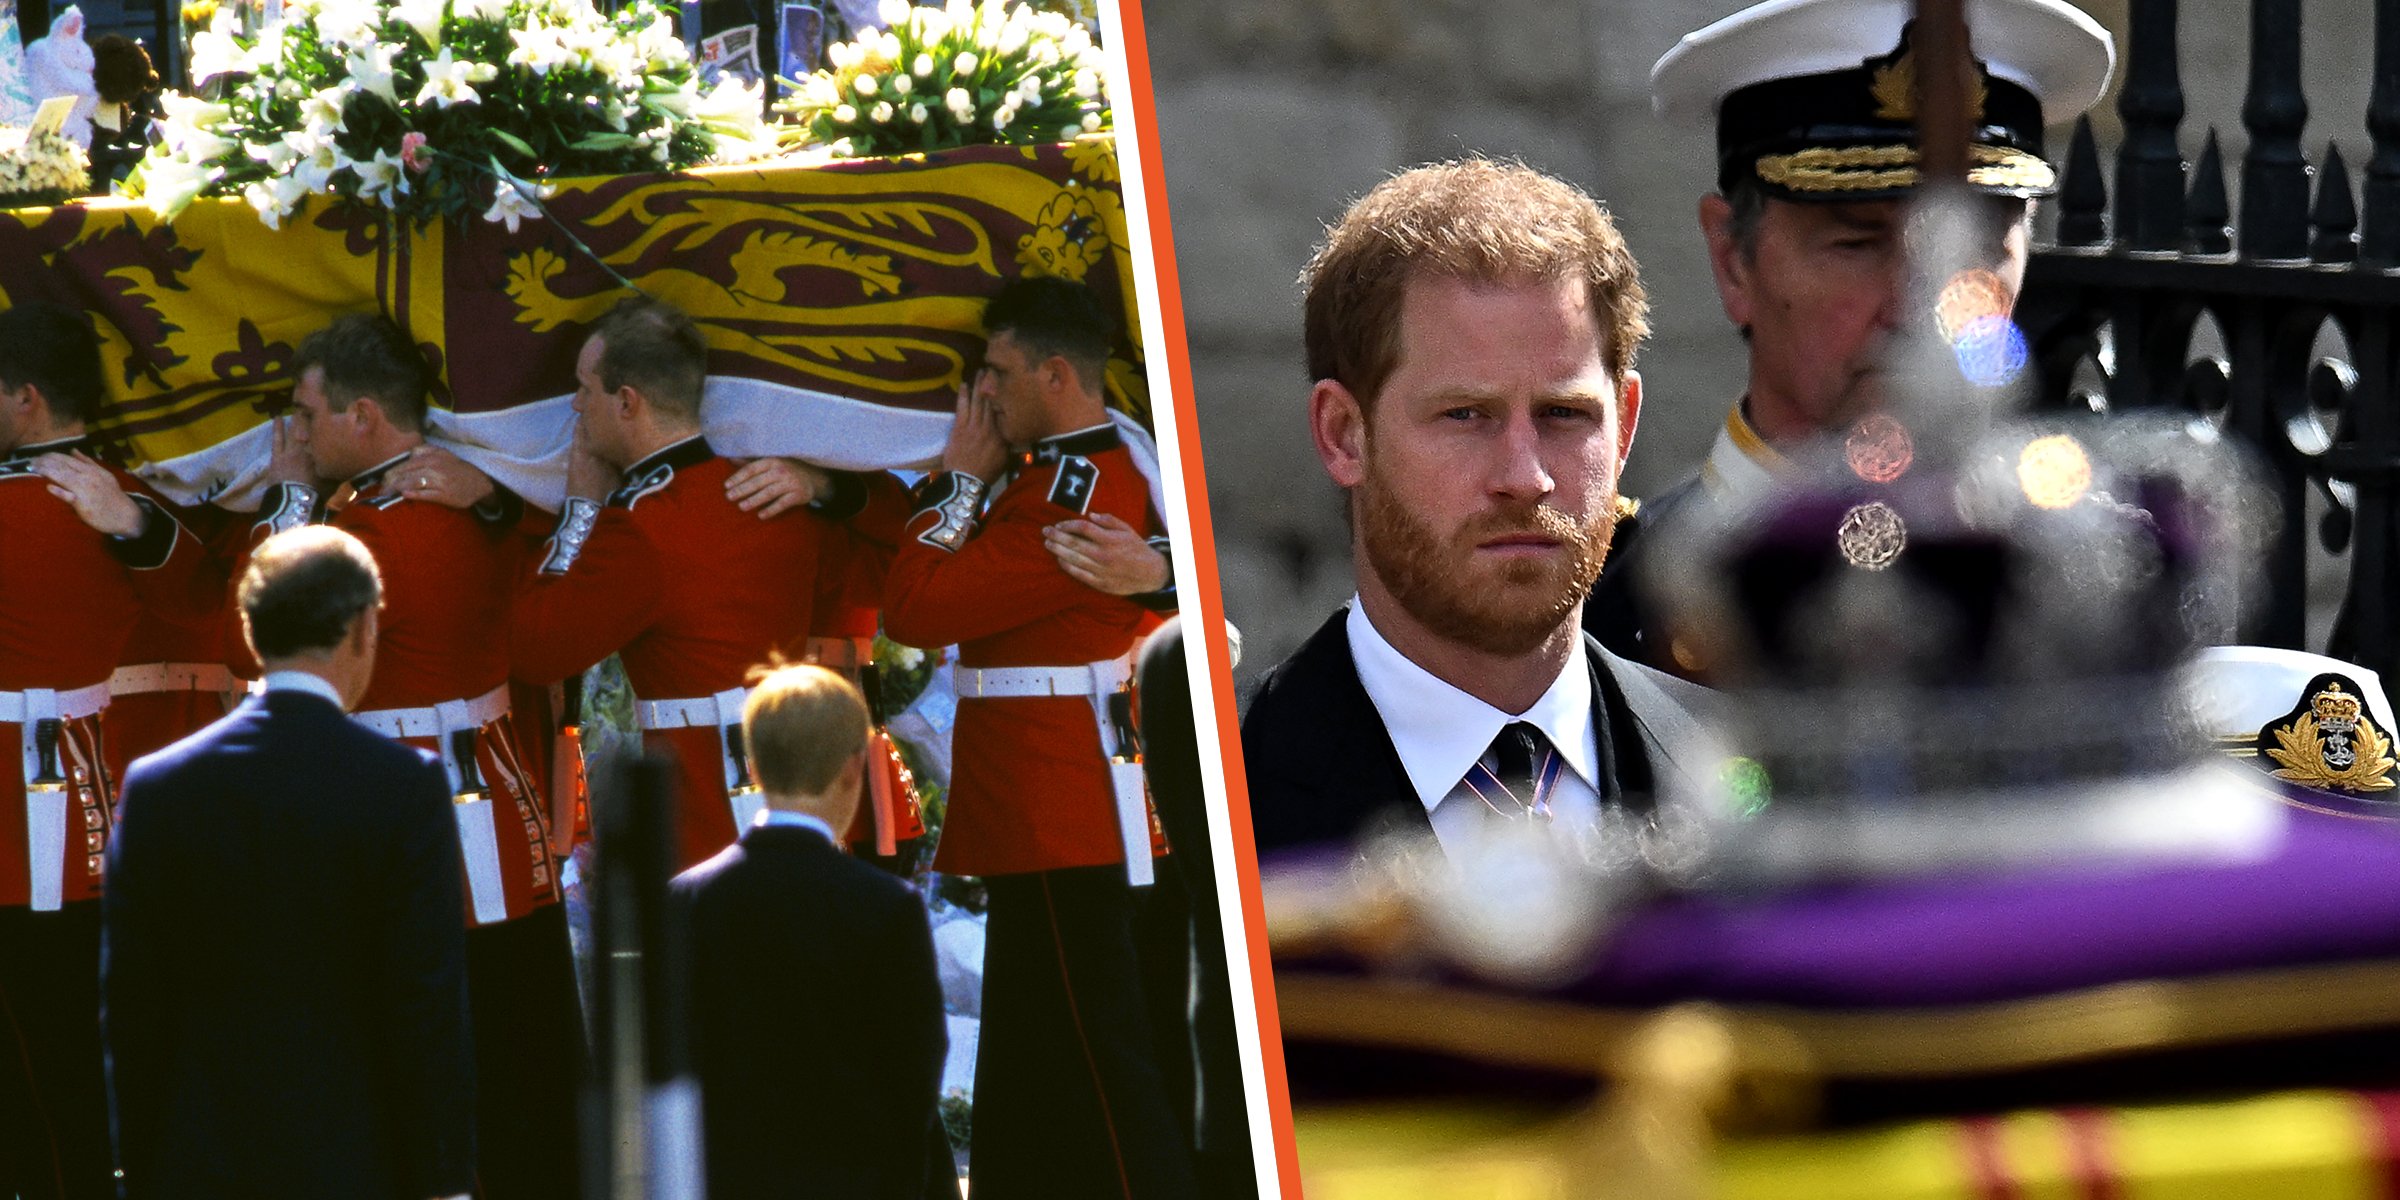 King Charles III and Prince Harry | Prince Harry | Source: Getty Images